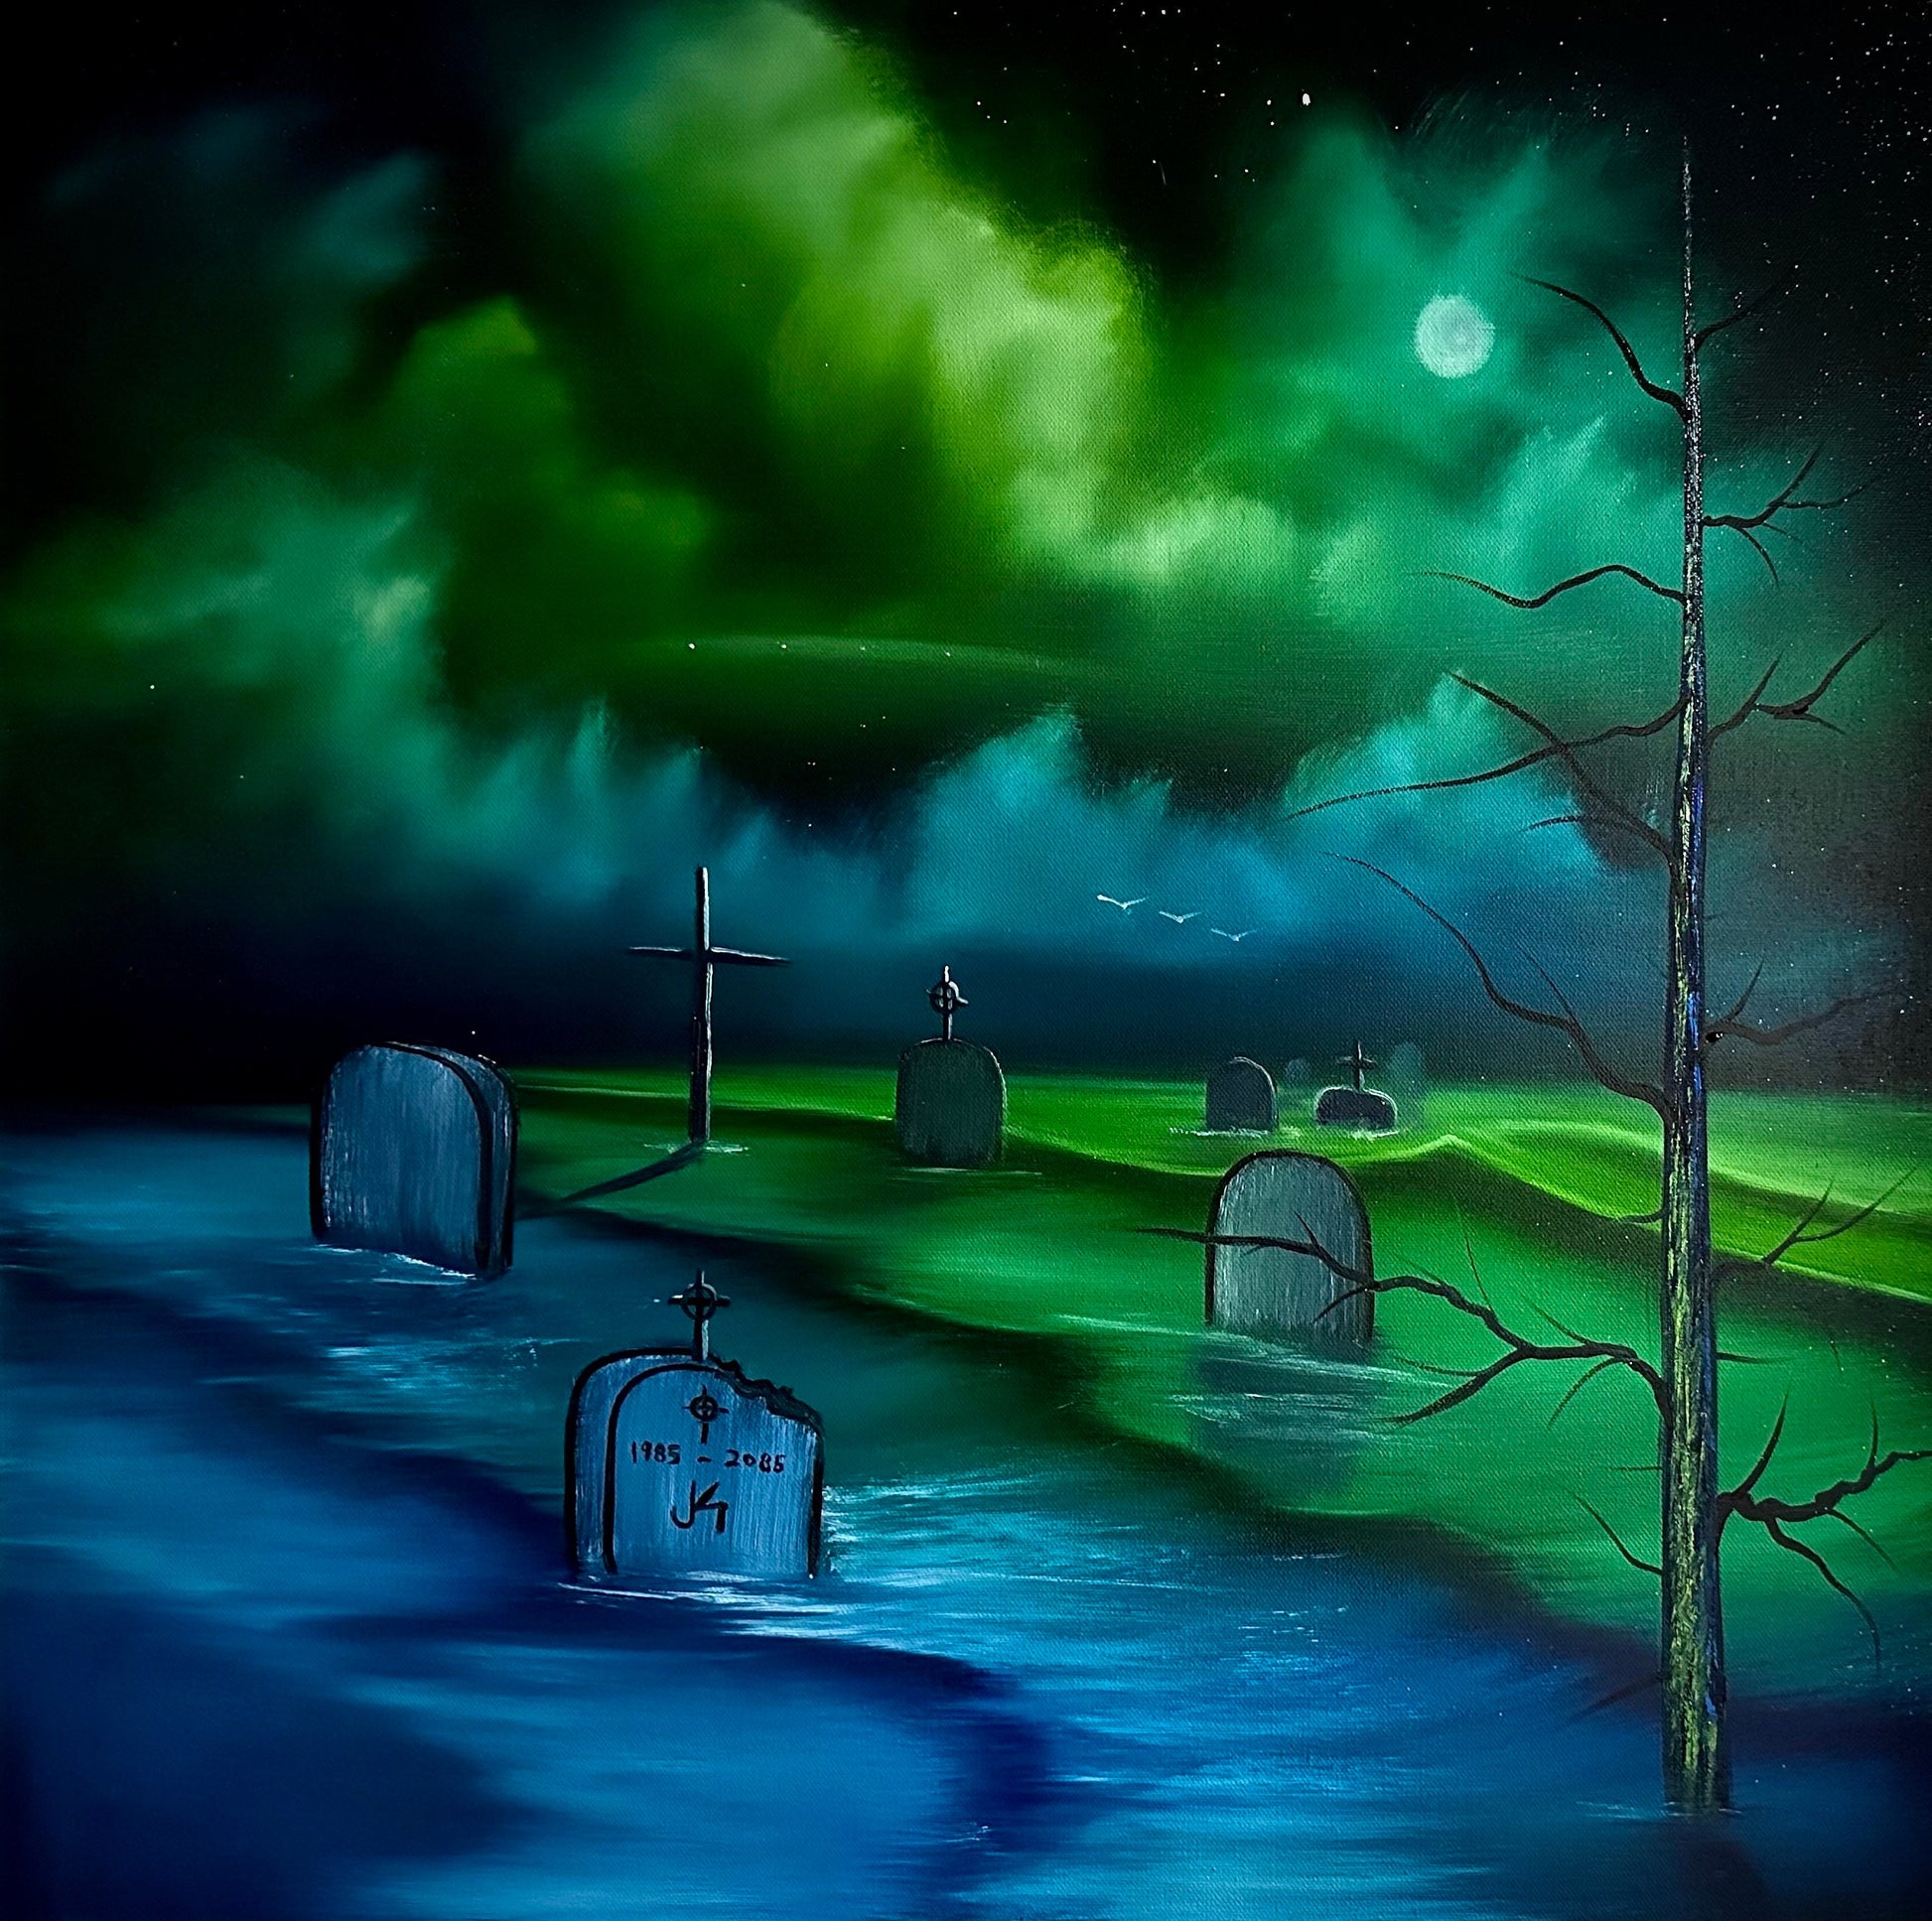 Painting 955 - 24x24" Pro Series Canvas Green Halloween Graveyard Seascape with Tombstones painted Live on TikTok - 9/22/23 by PaintWithJosh